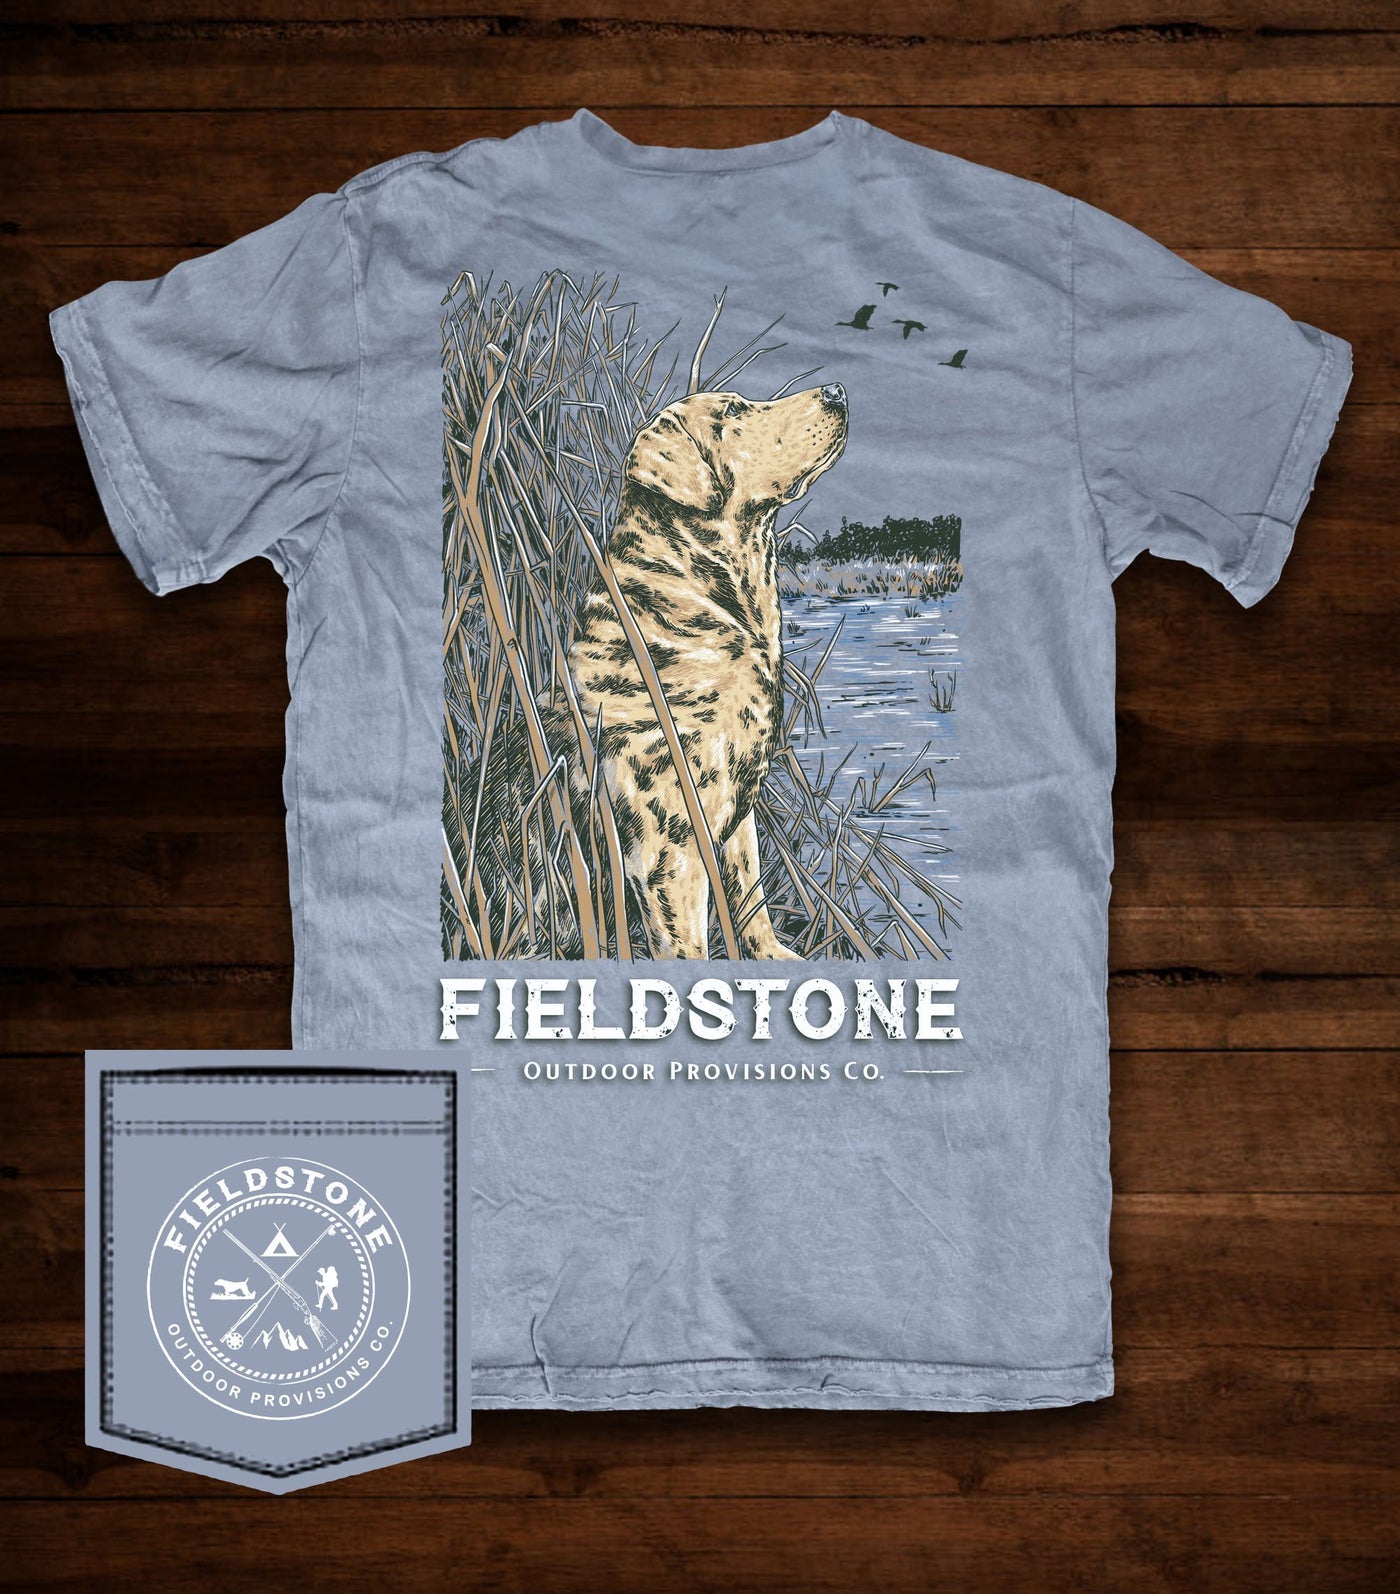 Old Yellow Short Sleeve T-Shirt (Youth) by Fieldstone Outdoors